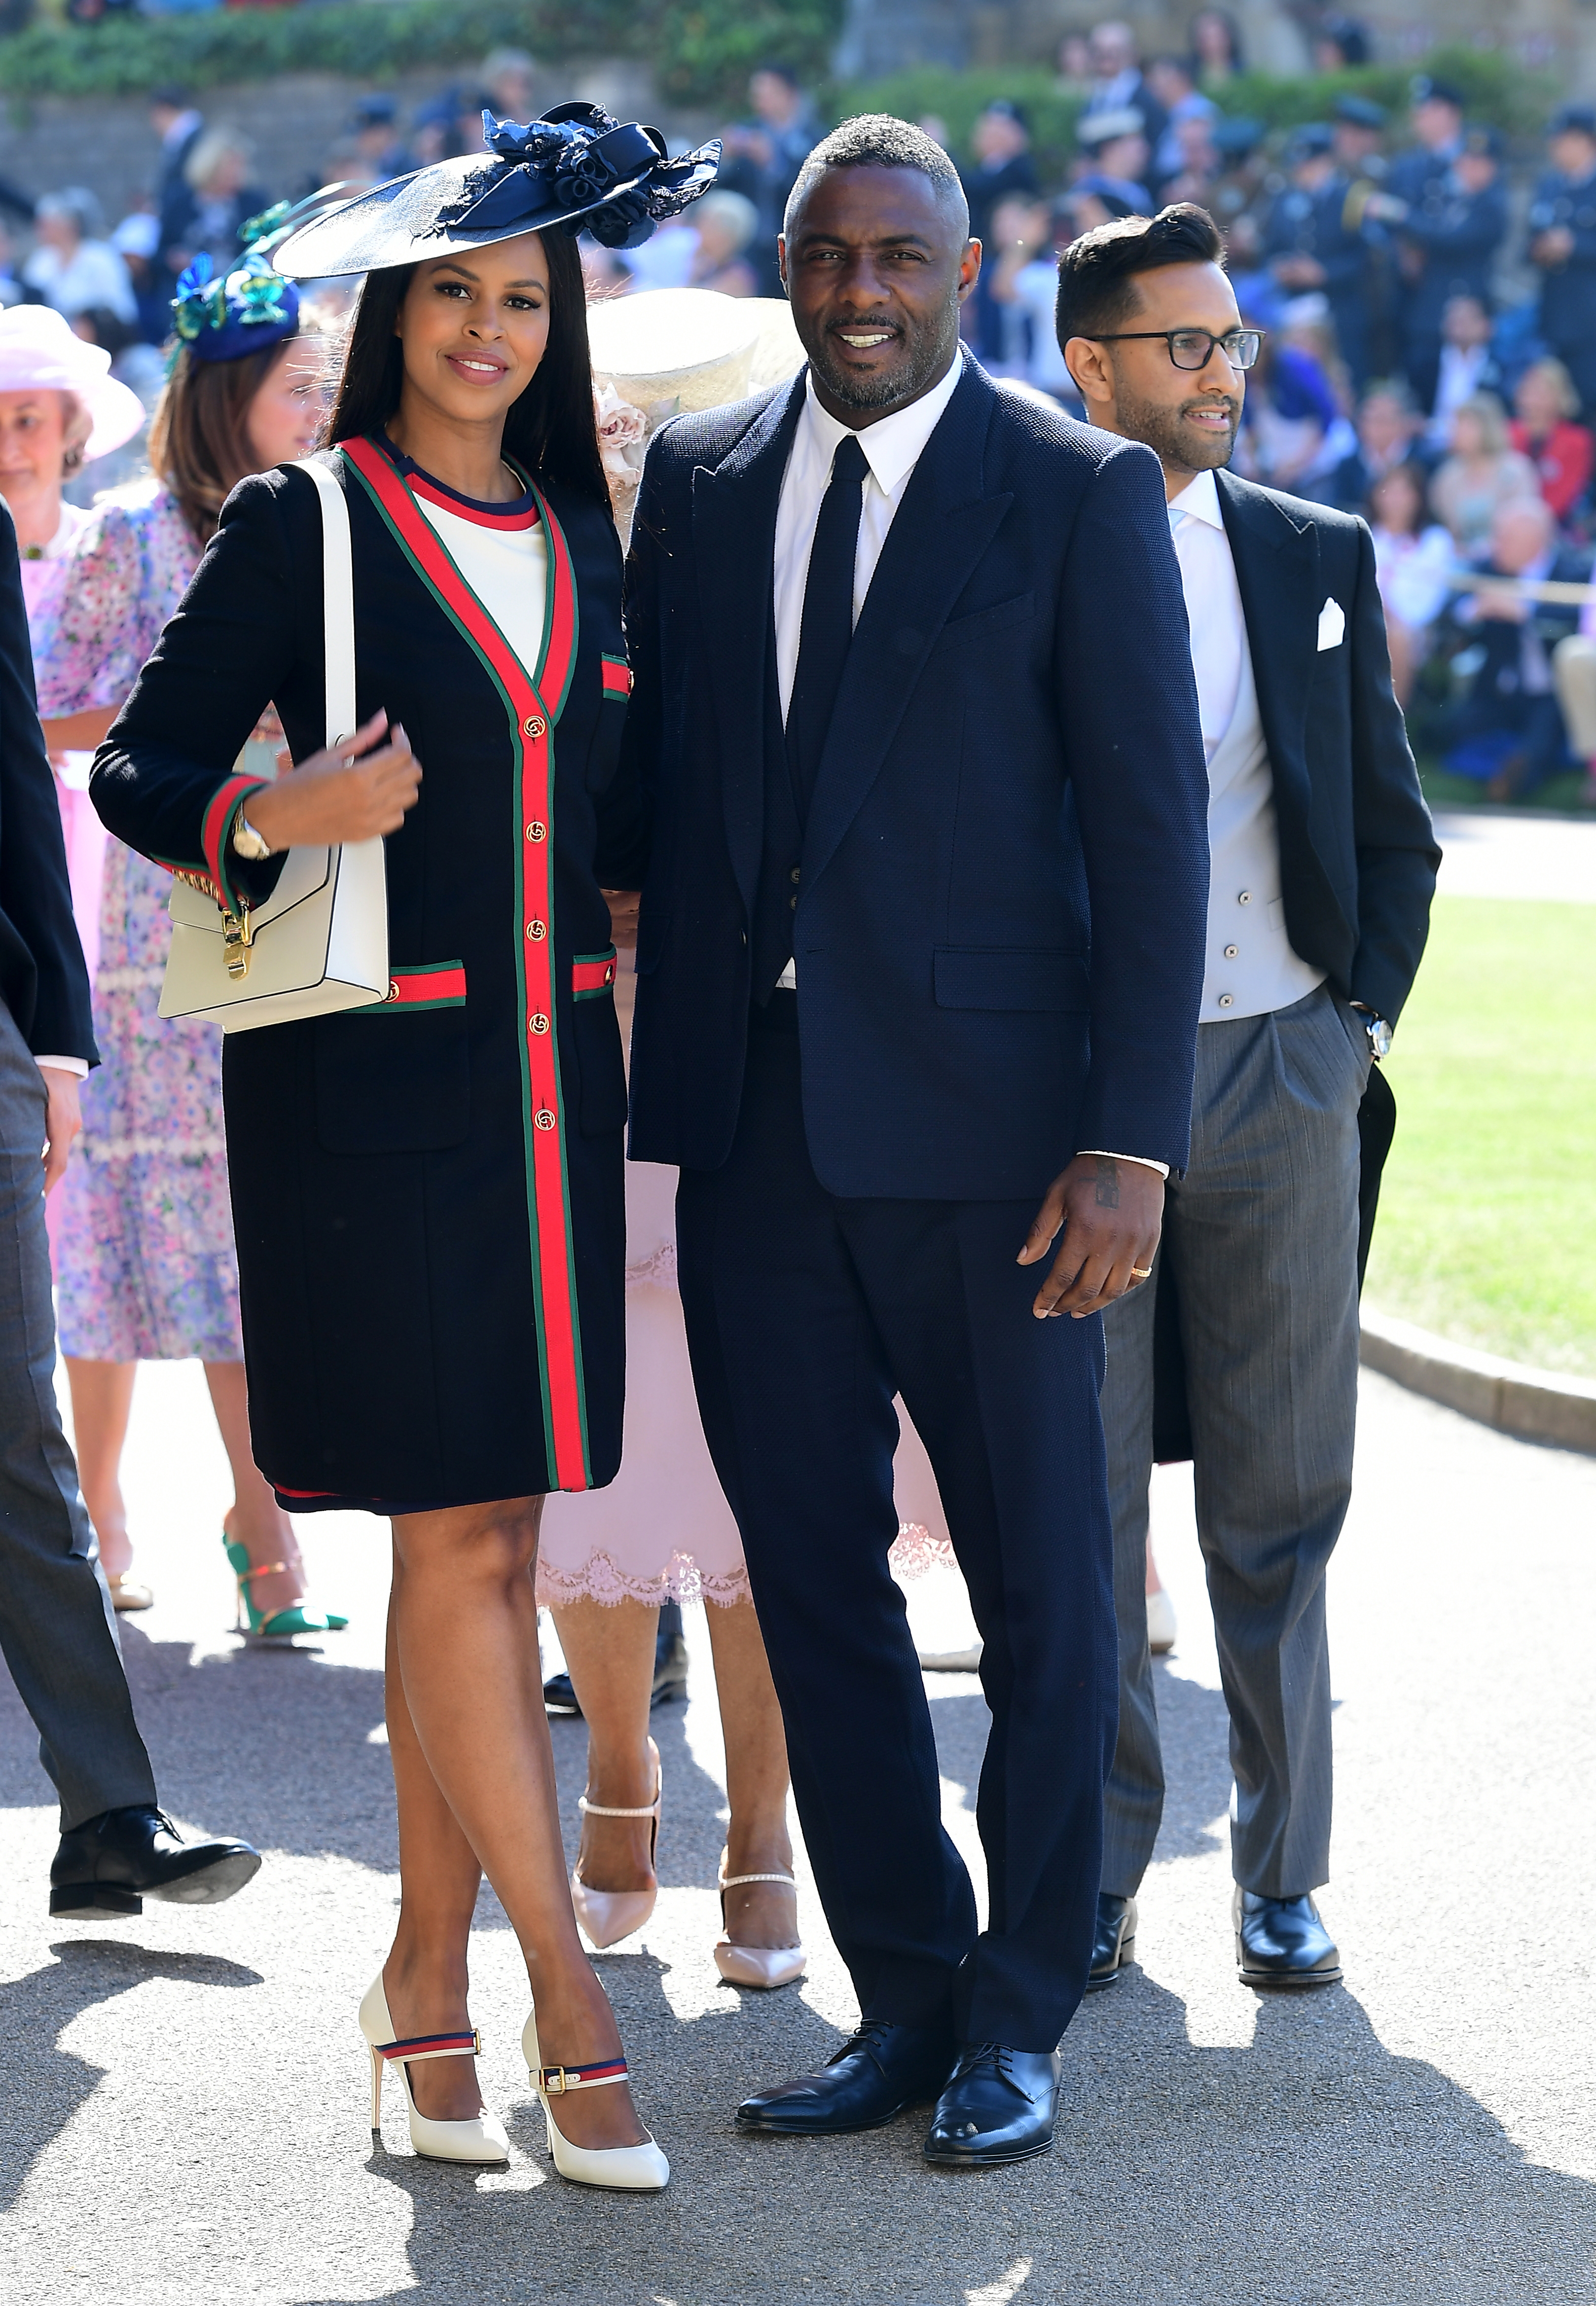 Idris Elba and Sabrina Dhowre arrives at St George's Chapel at Windsor Castle for the wedding of Meghan Markle and Prince Harry.